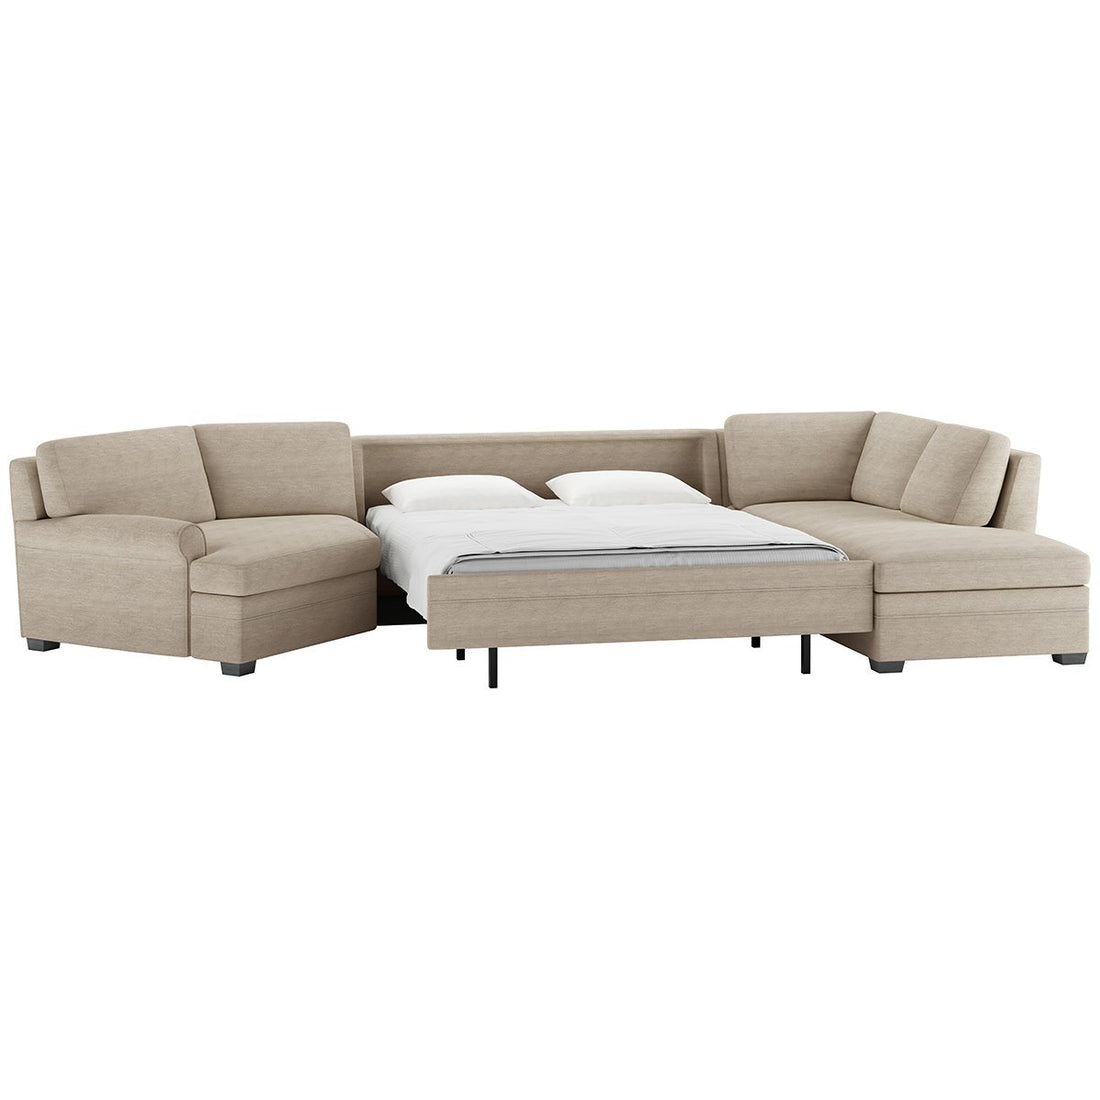 Gaines Leather Comfort Sleeper by American Leather